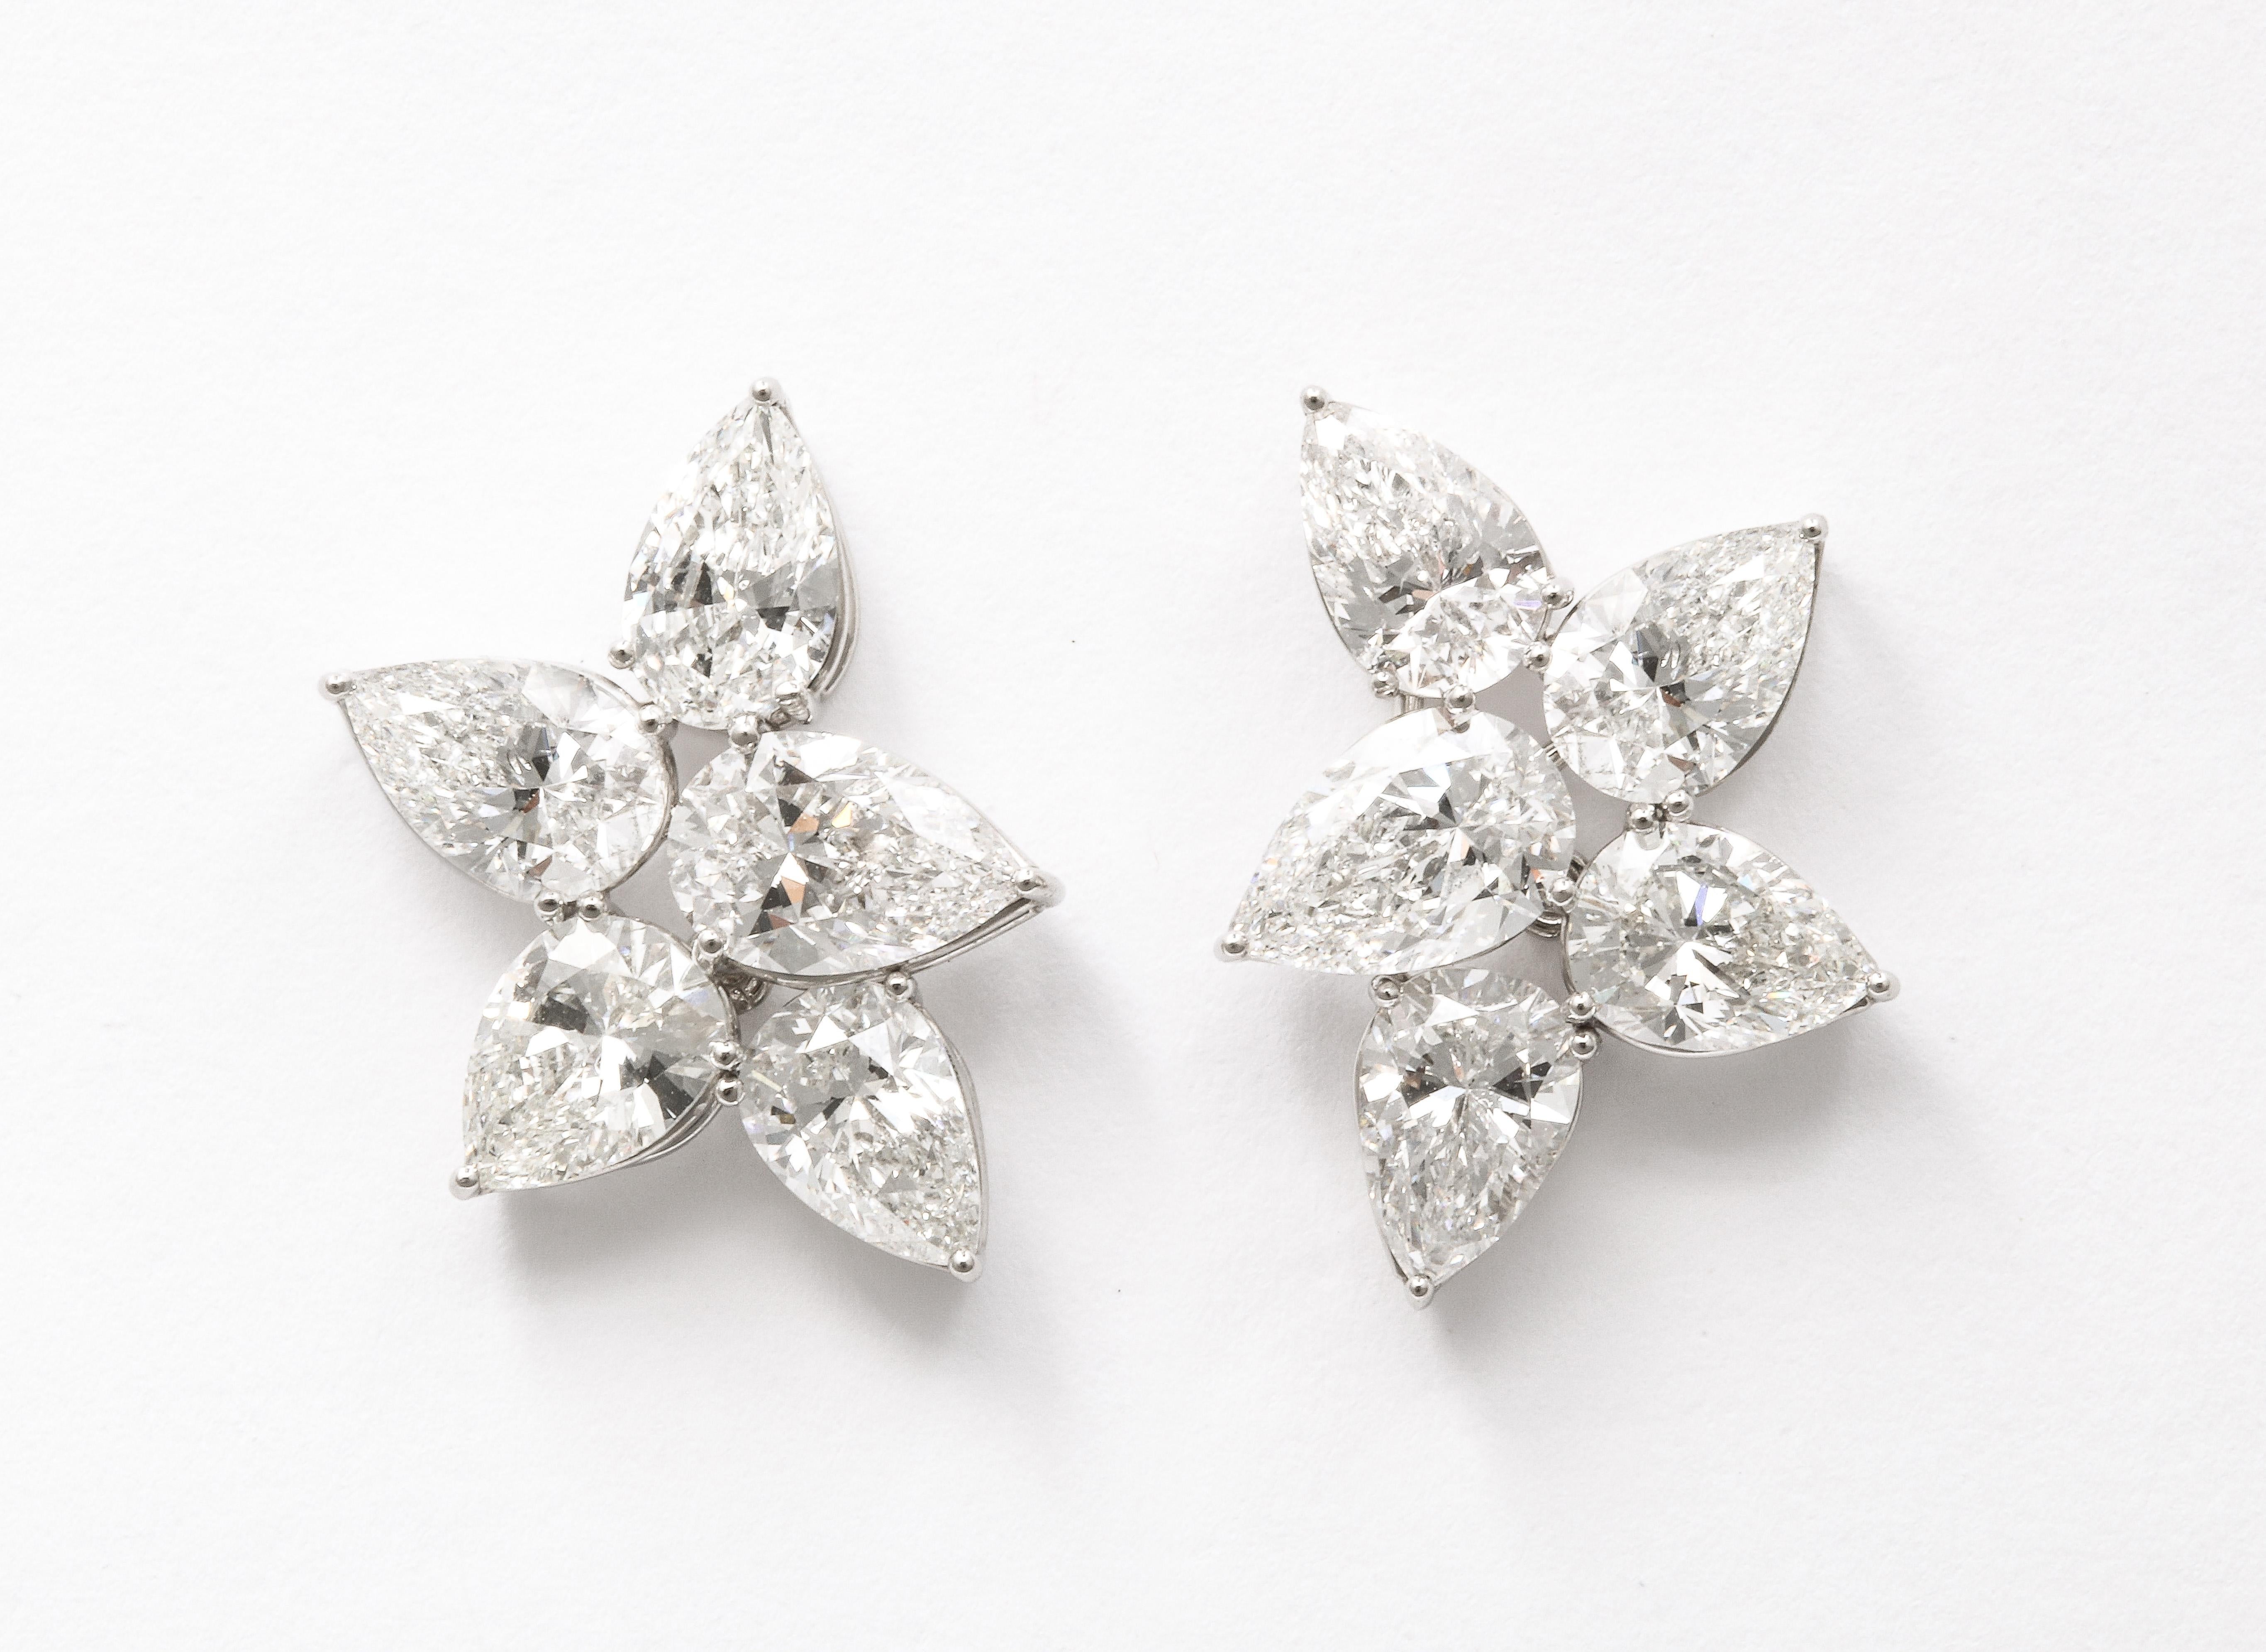 
8.29 carats of colorless white pear shapes set in a handmade platinum mounting. 

Approximately .75 inches long and .60 inches wide. 

An INCREDIBLE pair of cluster earrings only found in the worlds top jewelry houses. 